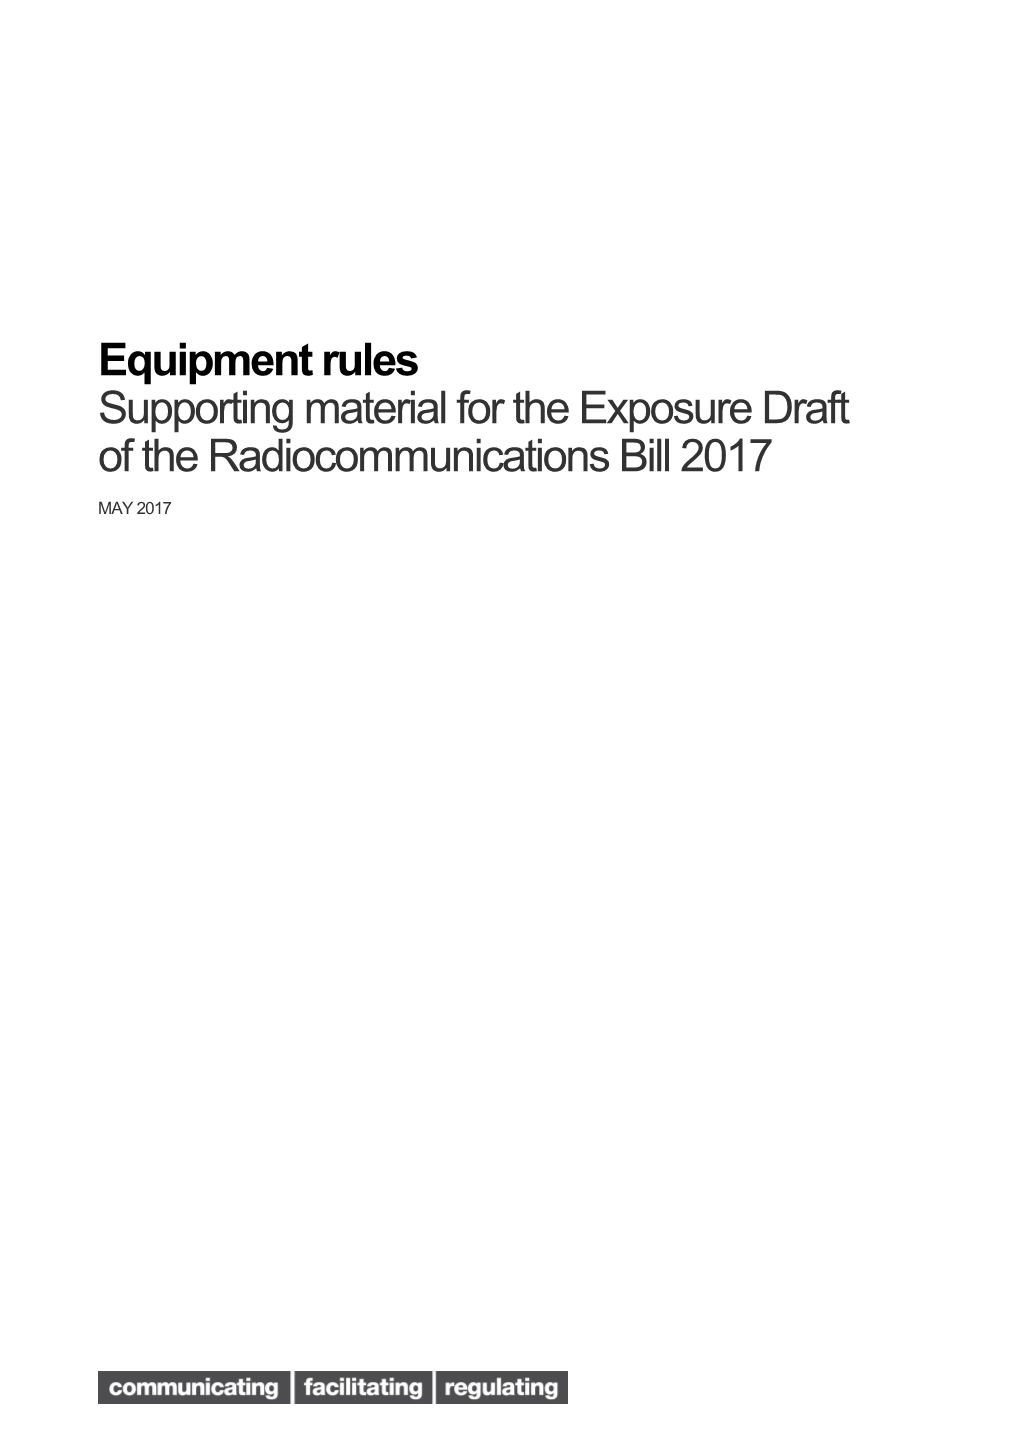 Supporting Material for Theexposure Draft of the Radiocommunications Bill 2017